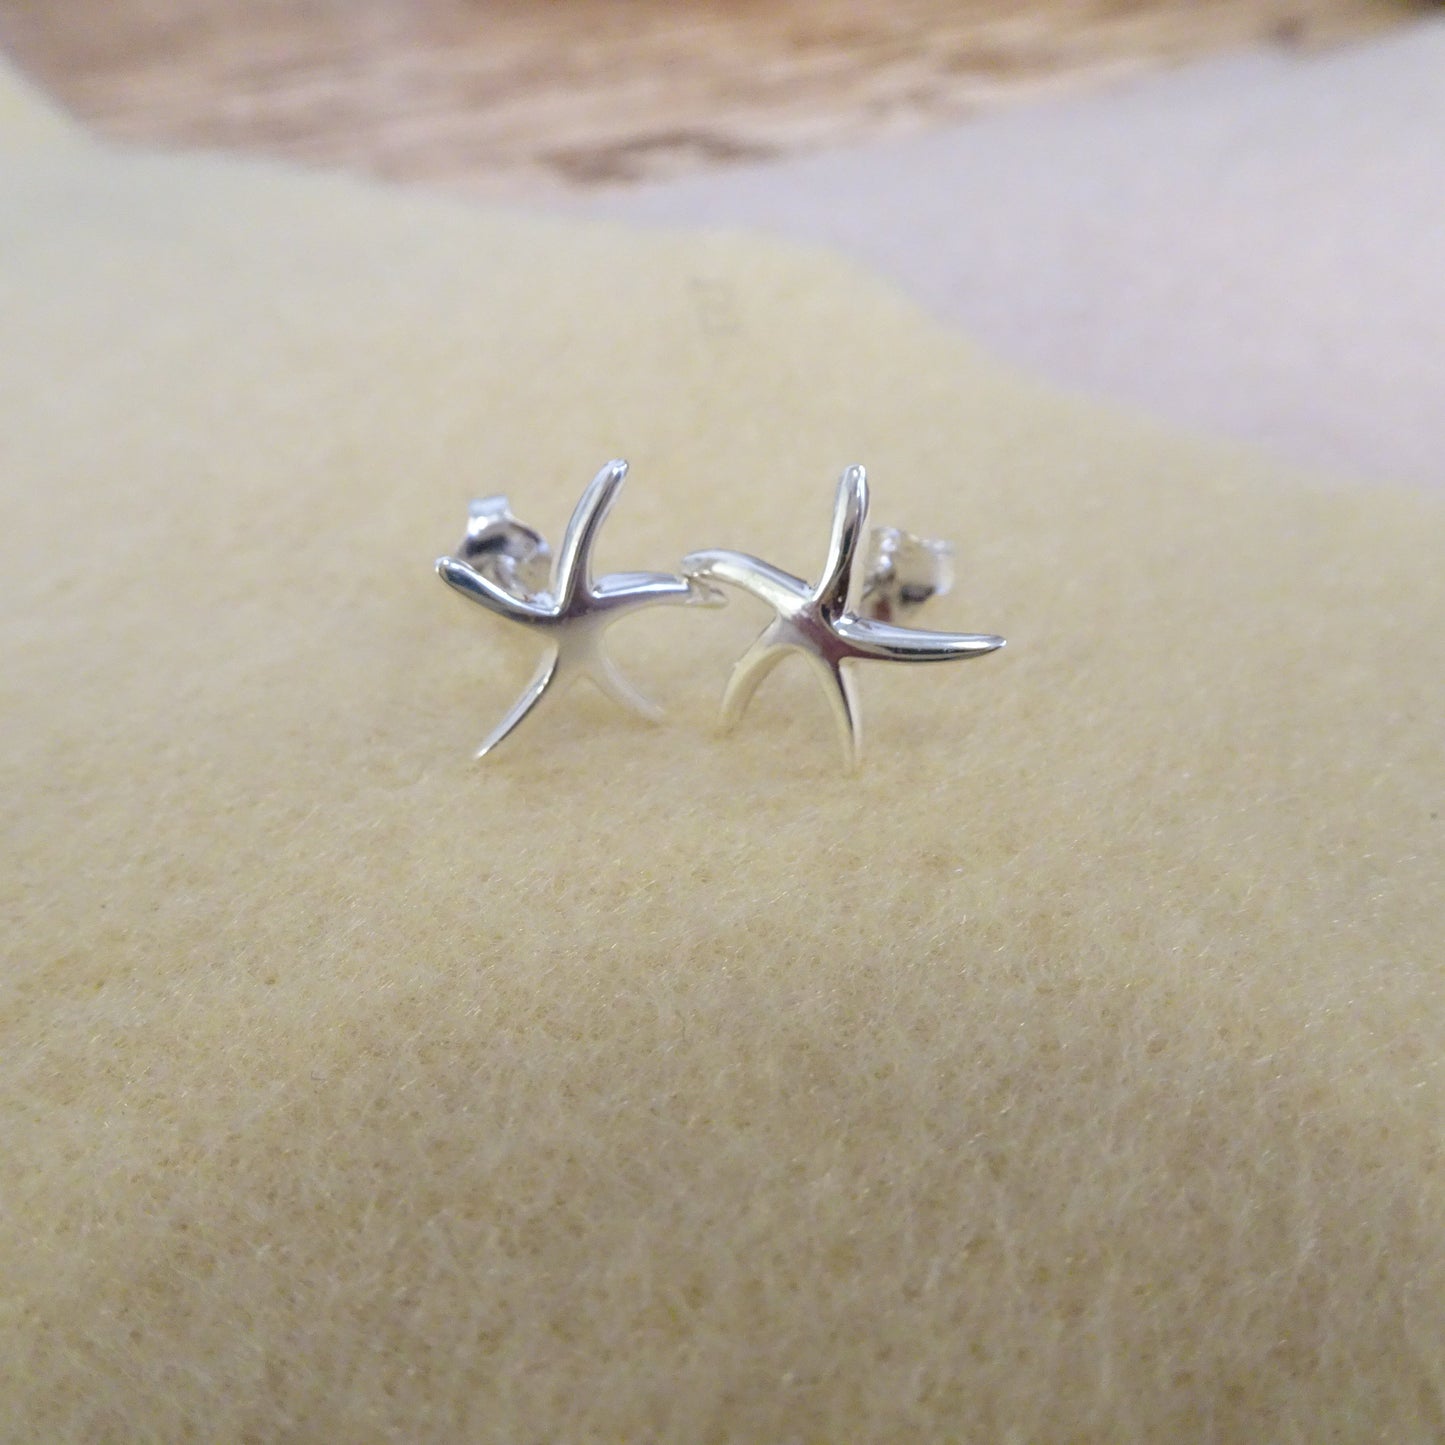 Sterling Silver Small Starfish Stud Earrings